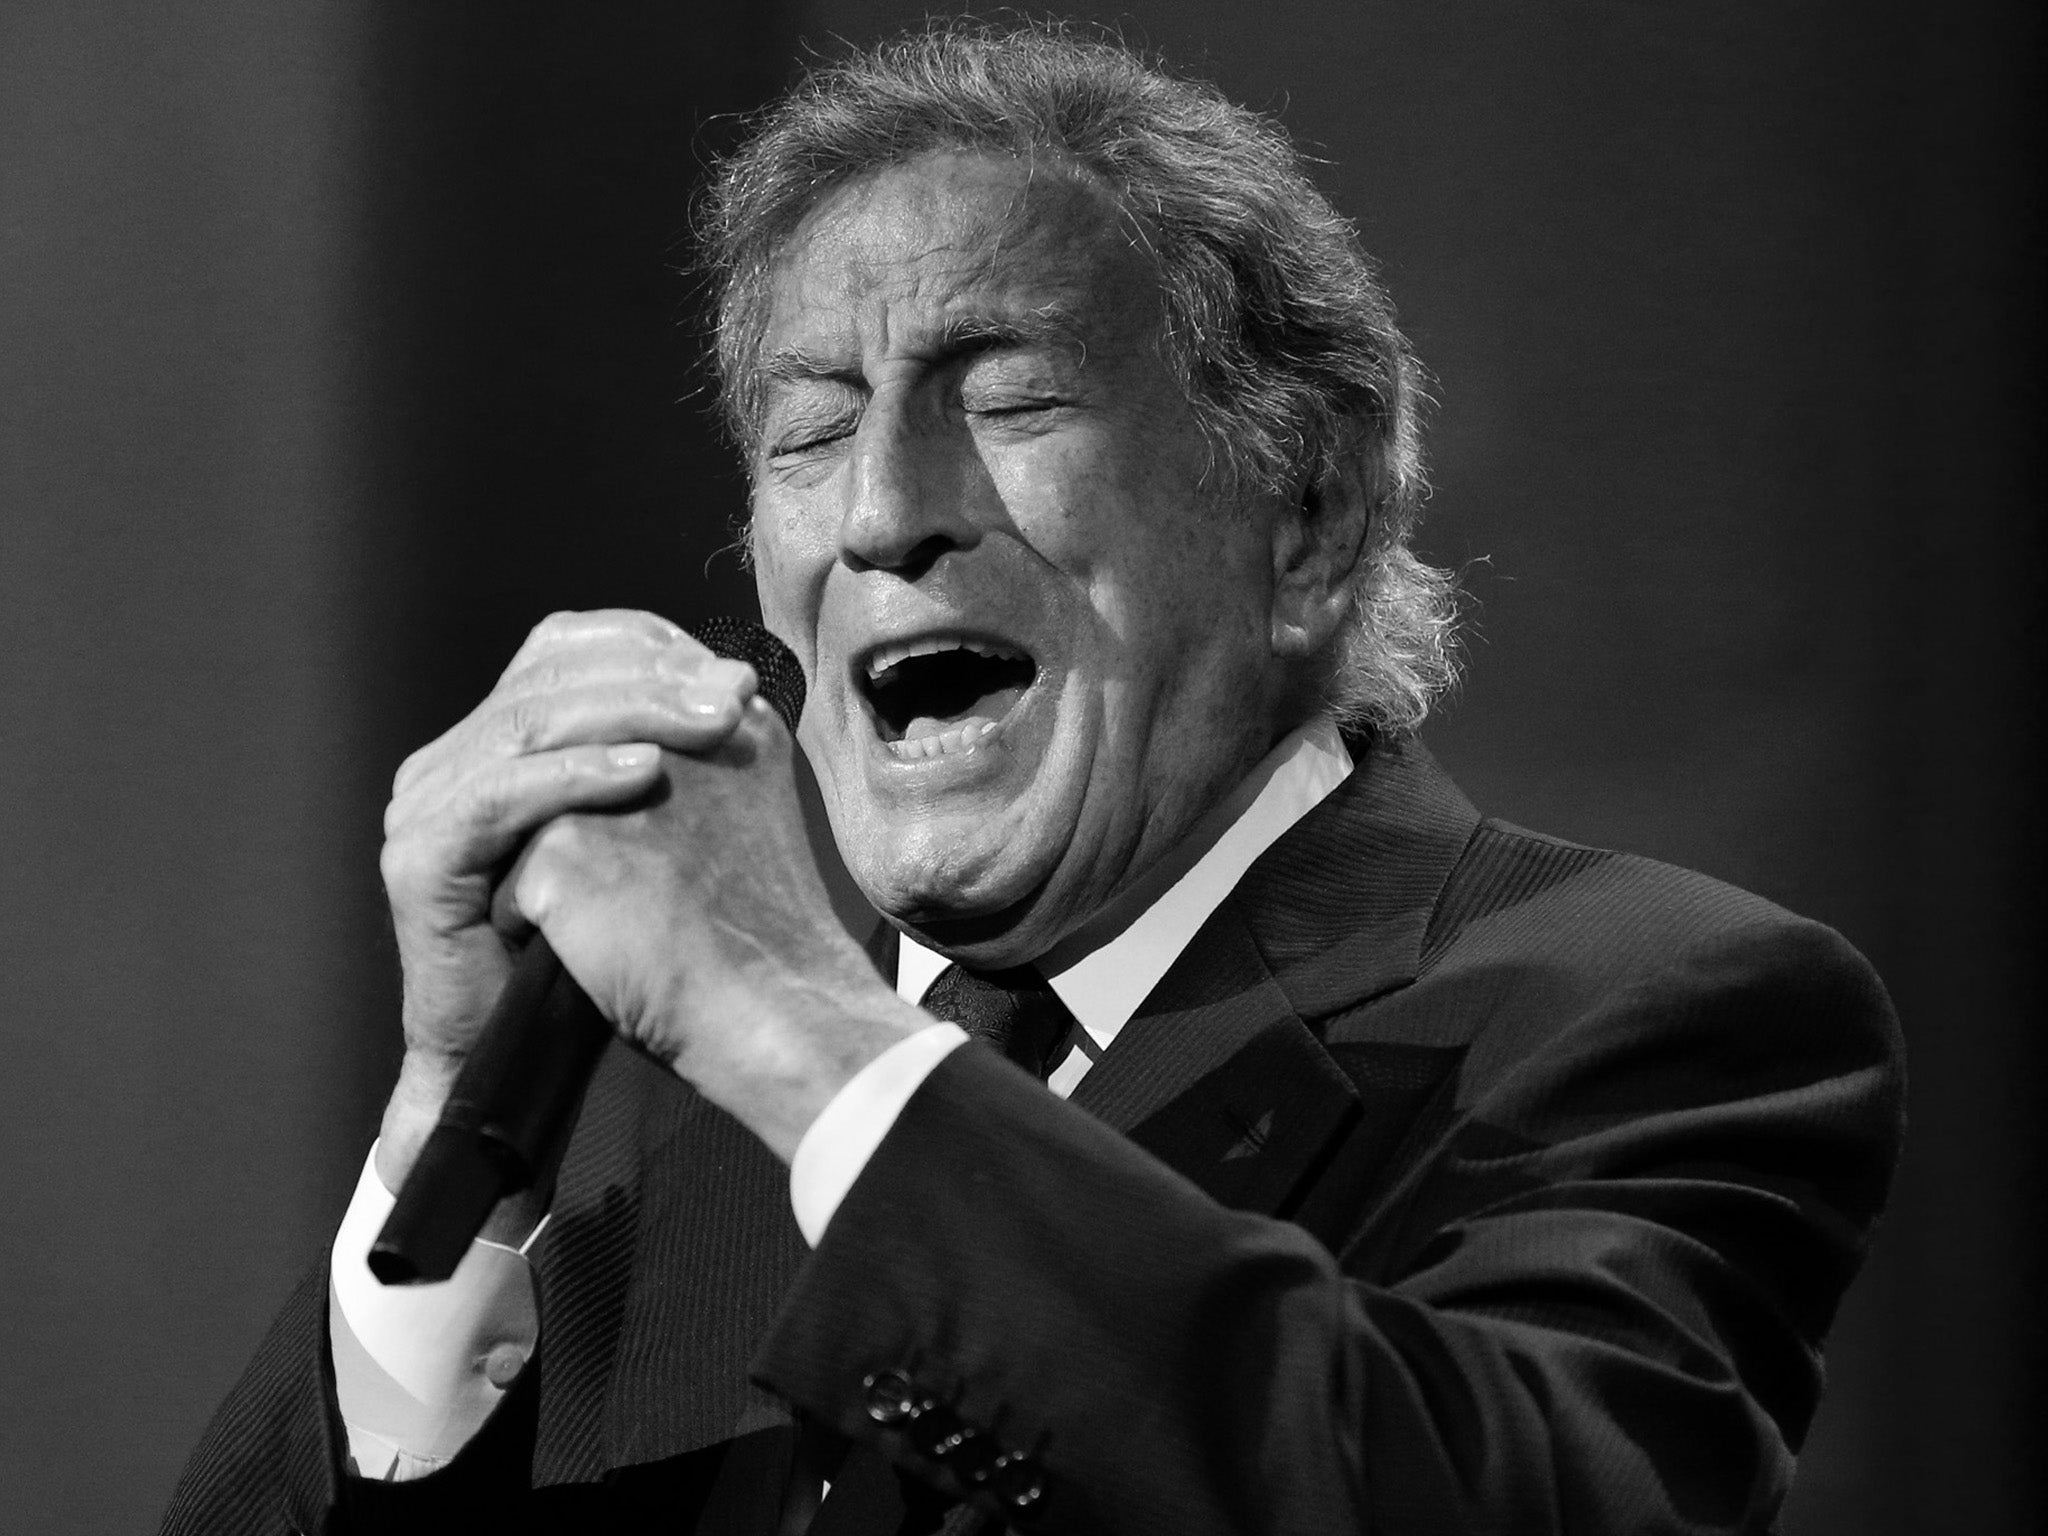 Tony Bennett worked with the likes of Amy Winehouse, Lady Gaga and Aretha Franklin